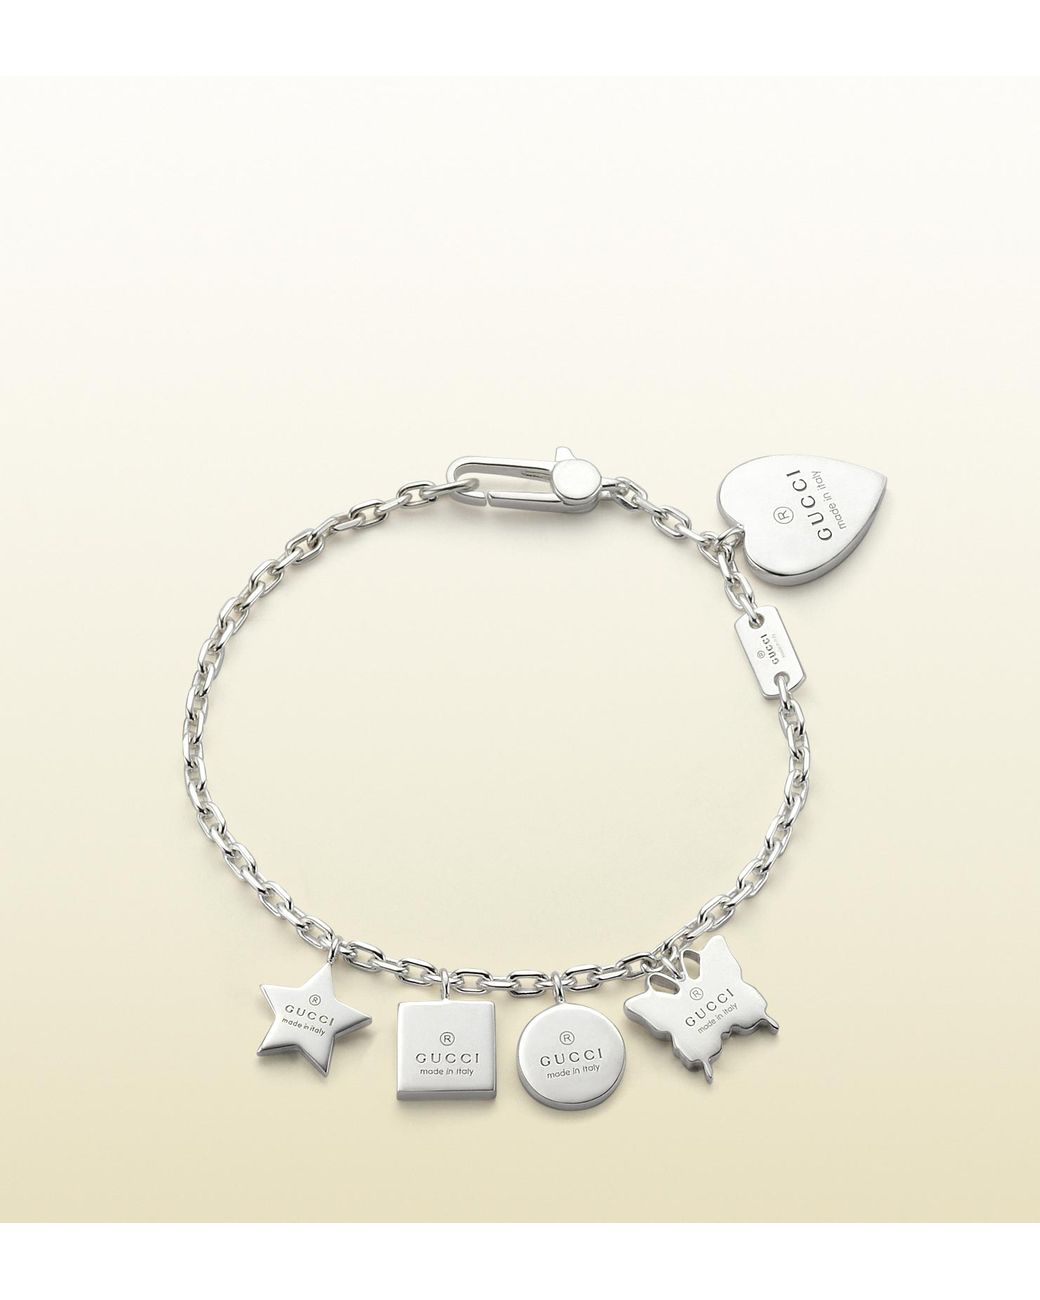 Gucci Bracelet with Gucci Trademark Engraved Charms in Metallic